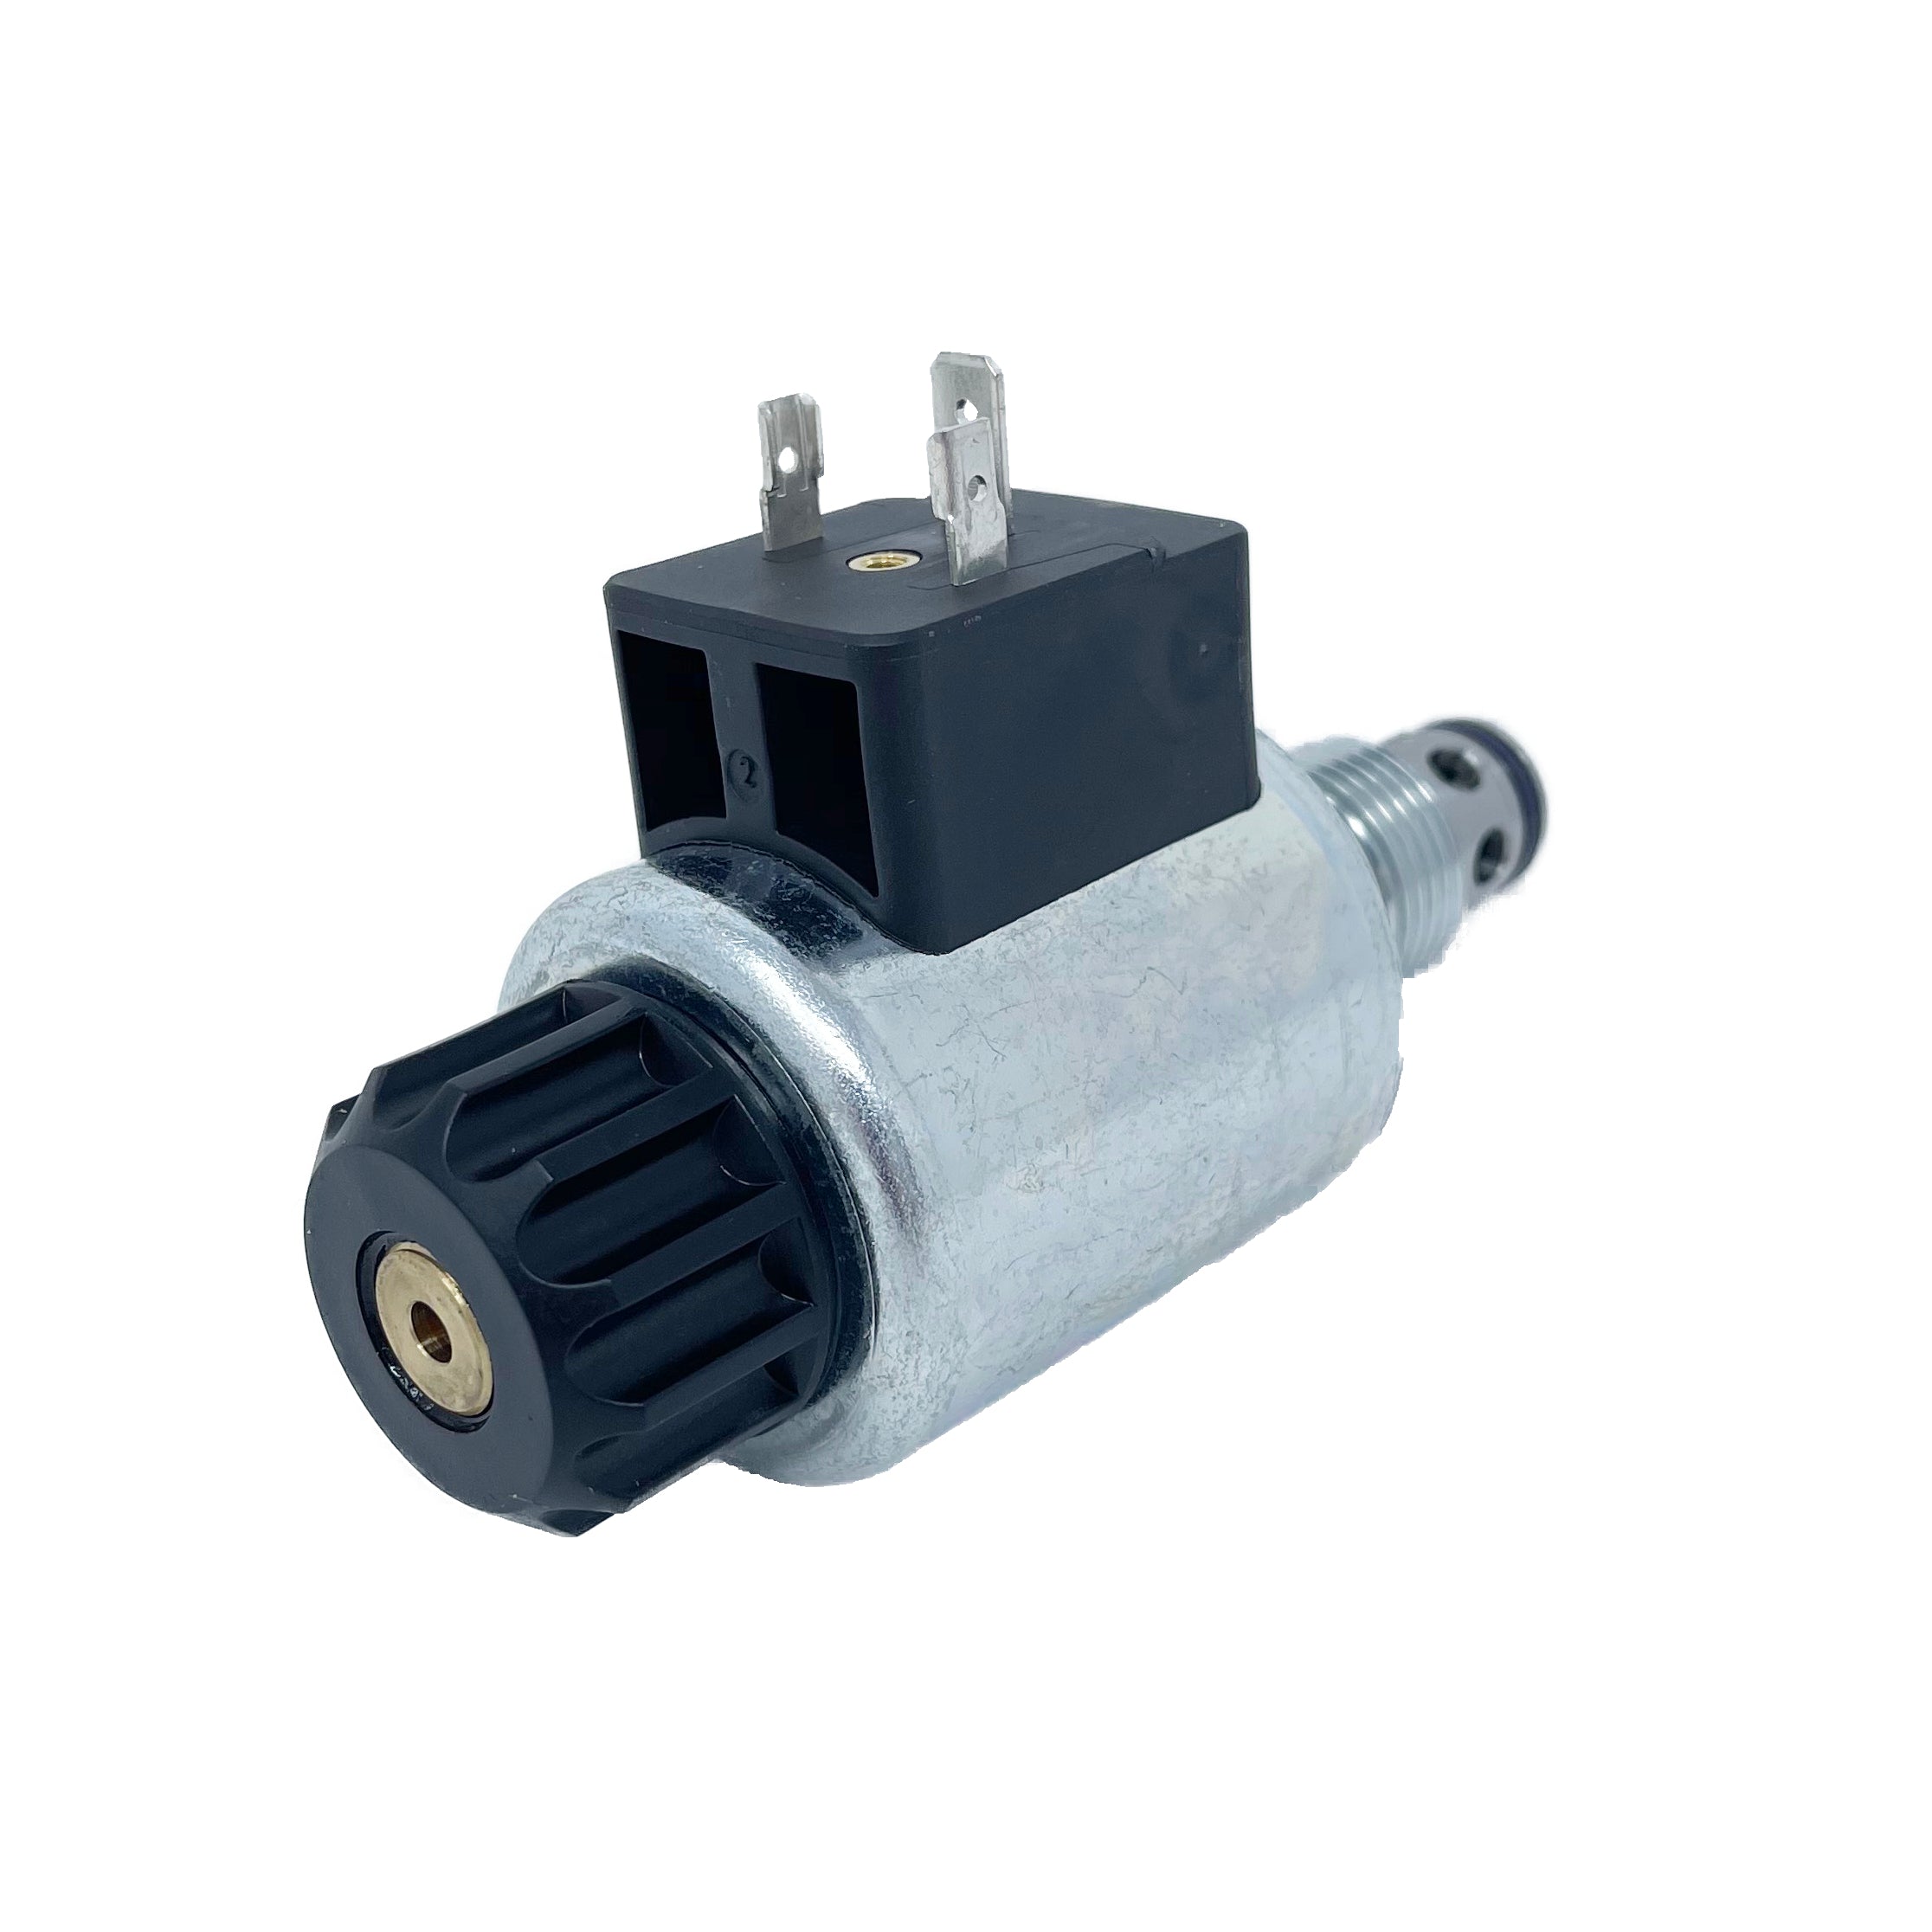 SD3E-B2/H2O2A12DIN : Argo DCV, 16GPM, 5100psi, 2P2W, C-10-2, 12 VDC DIN, Flow 1 to 2 Neutral